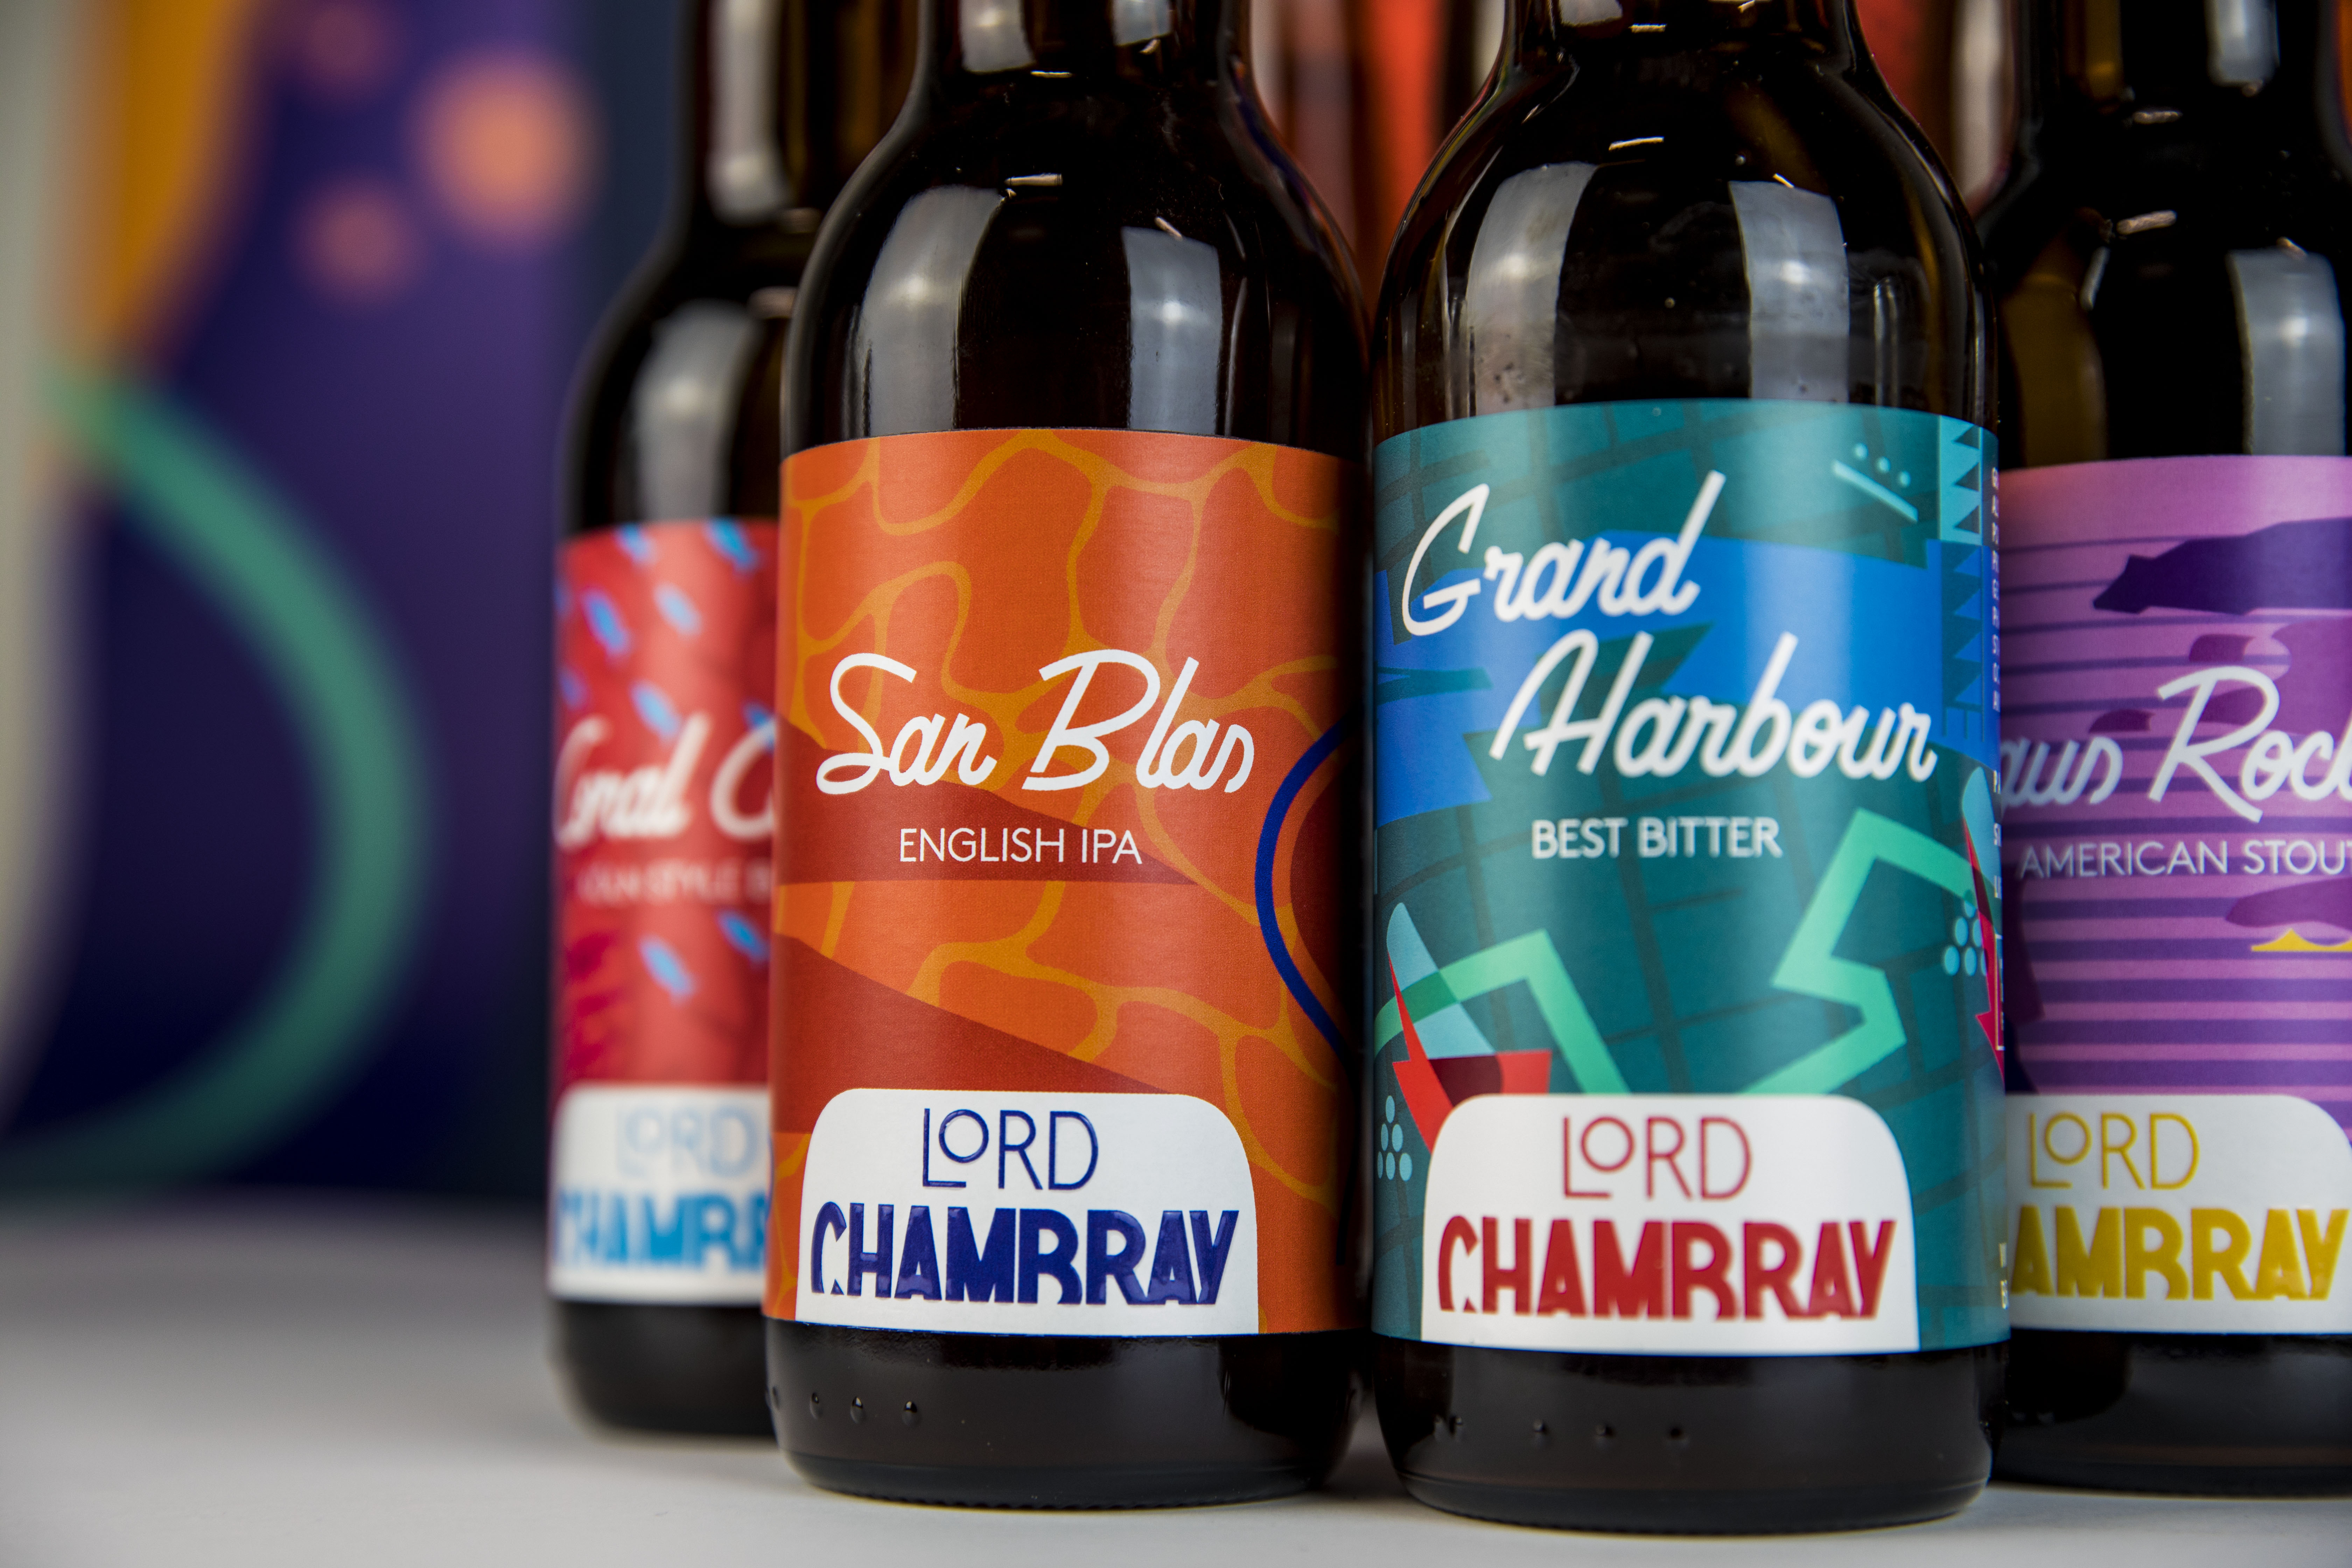 Lord Chambray – Craft Beer from Malta GLUTEN FREE.. SAME TASTE!